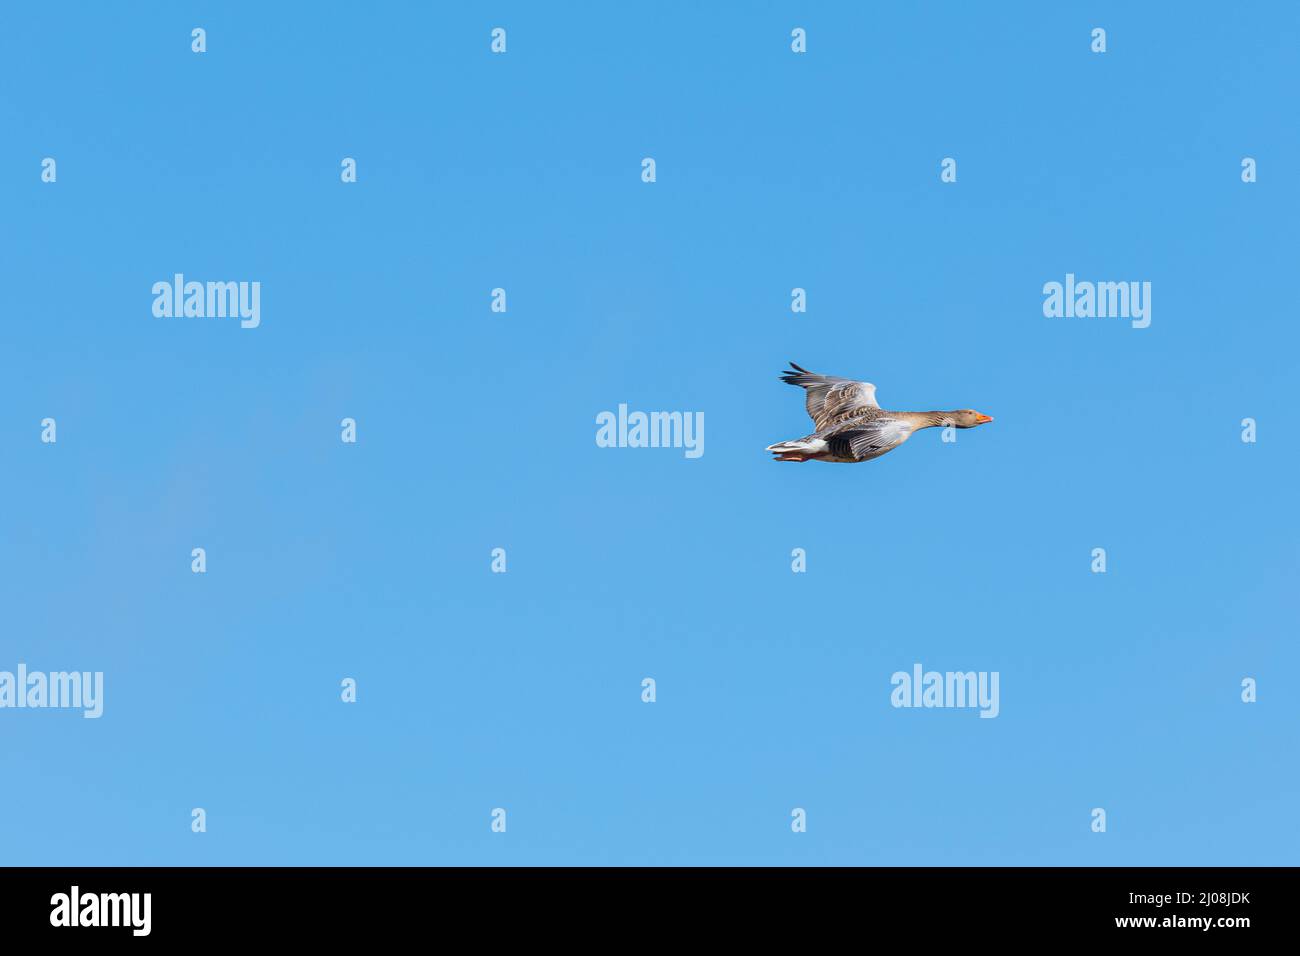 Greylag  Goose (Anser anser) flying in air with blue background without clouds Stock Photo